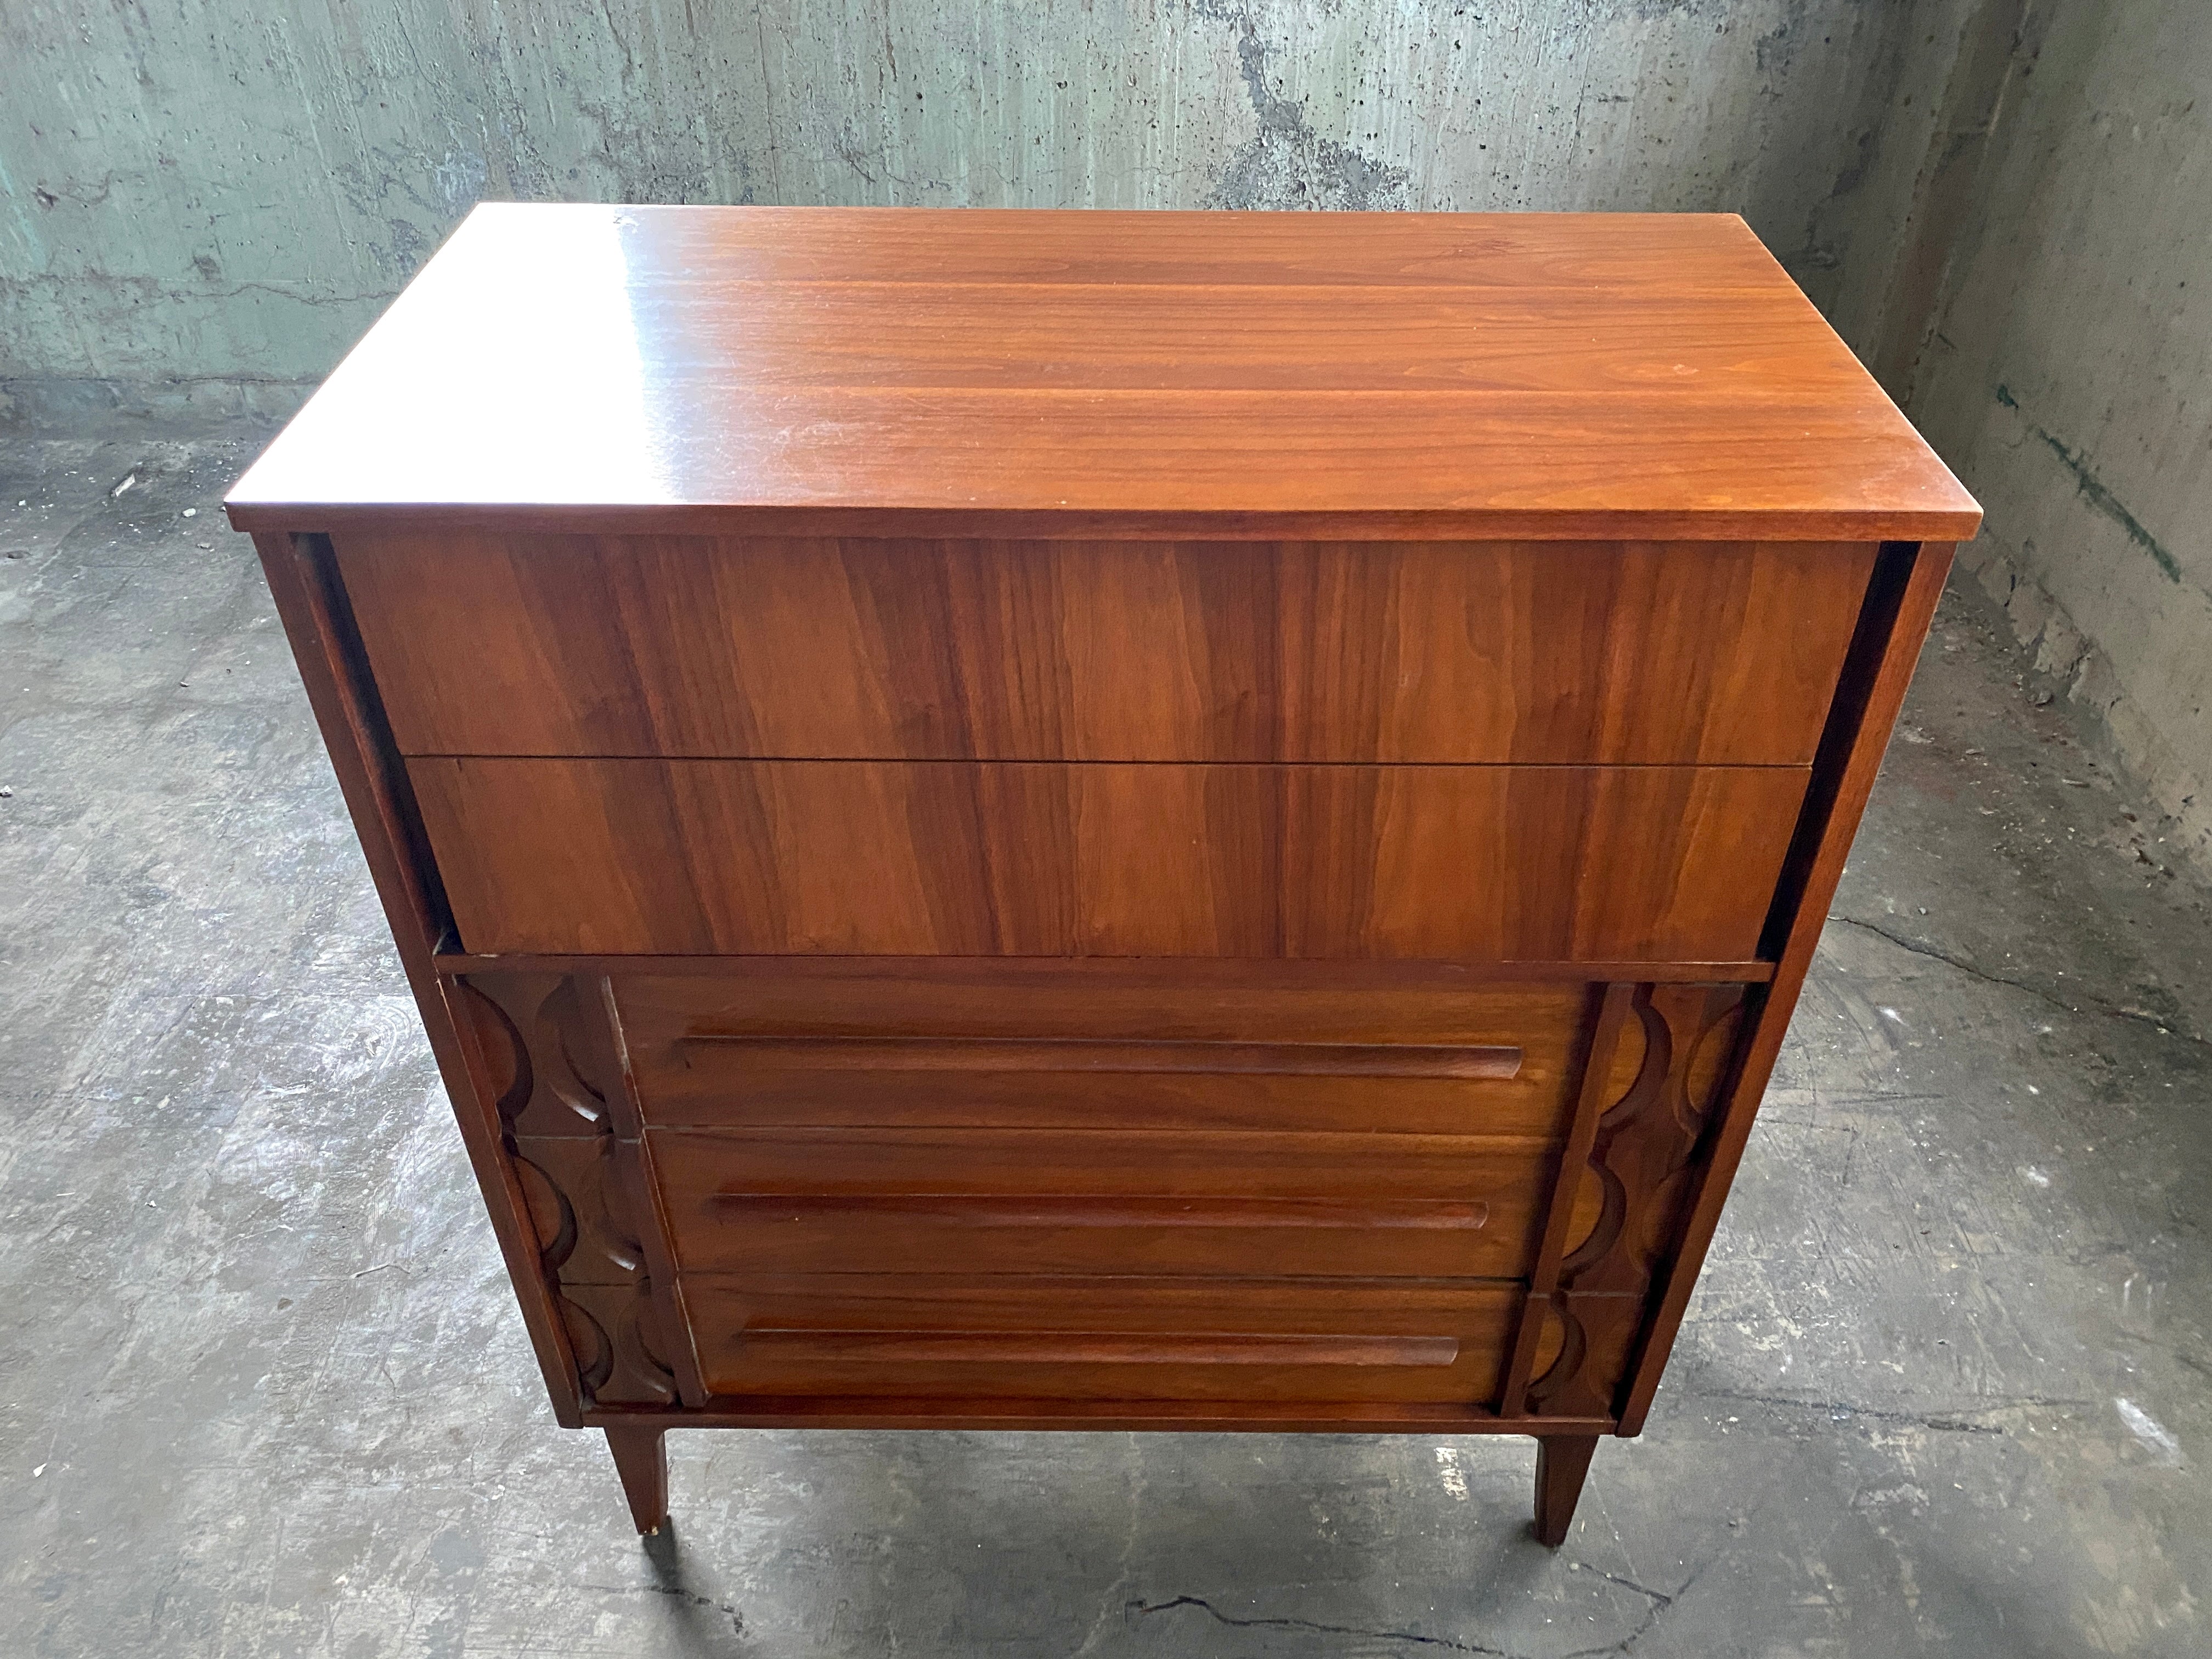 Vintage Mid-Century Five Drawer Dresser with Rosewood Accents